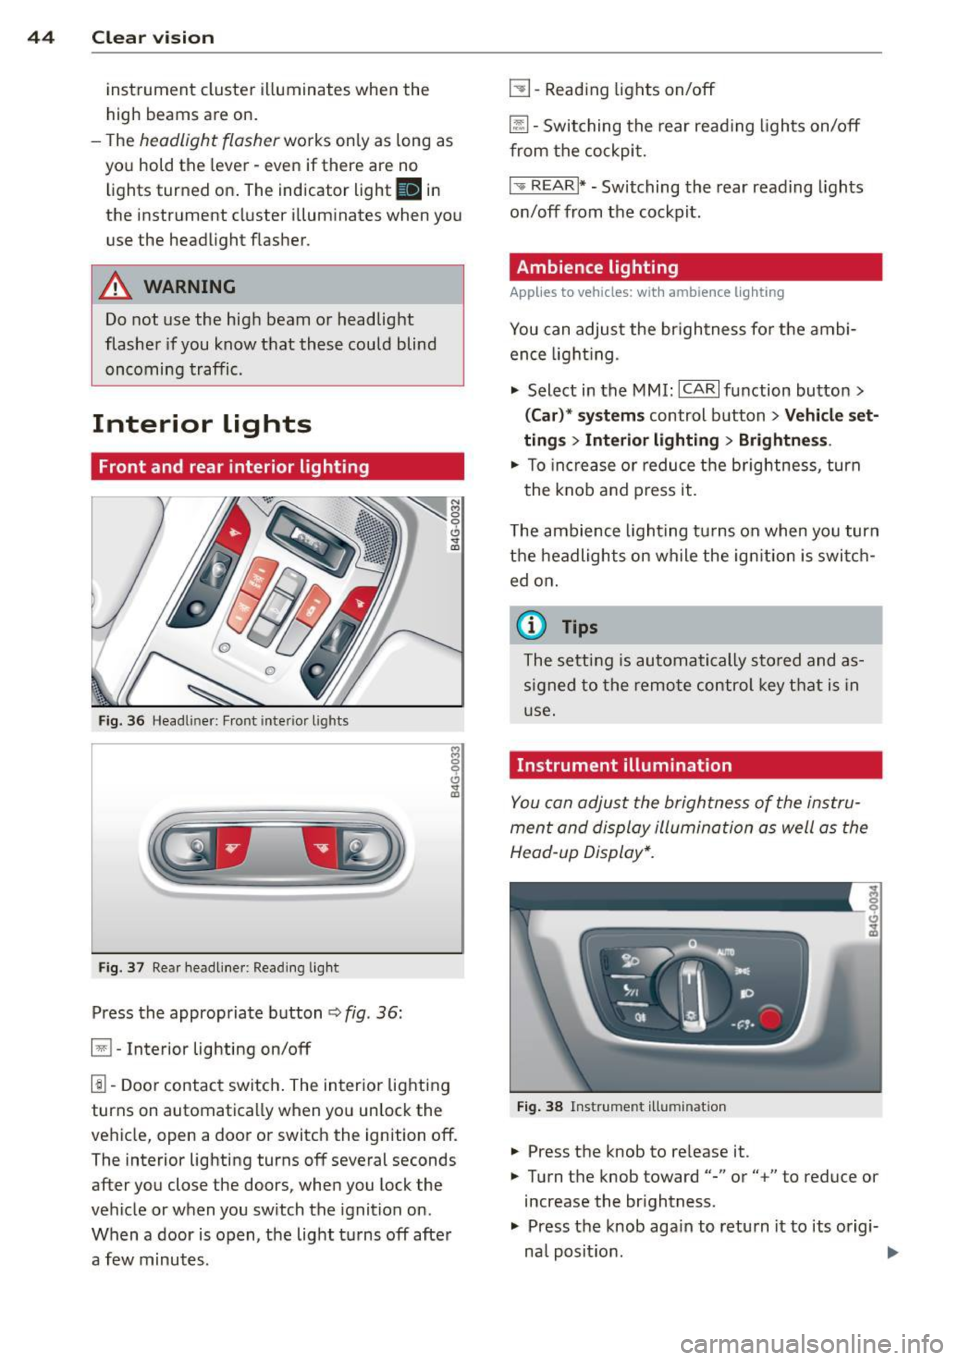 AUDI S6 2013 Service Manual 44  Clear vis ion 
instrument  cluste r illuminates  when  the 
high  beams are on. 
- T he 
headlight  flash er works  only  as long  as 
yo u hold  the lever - even if  there  are no 
l ights  turne